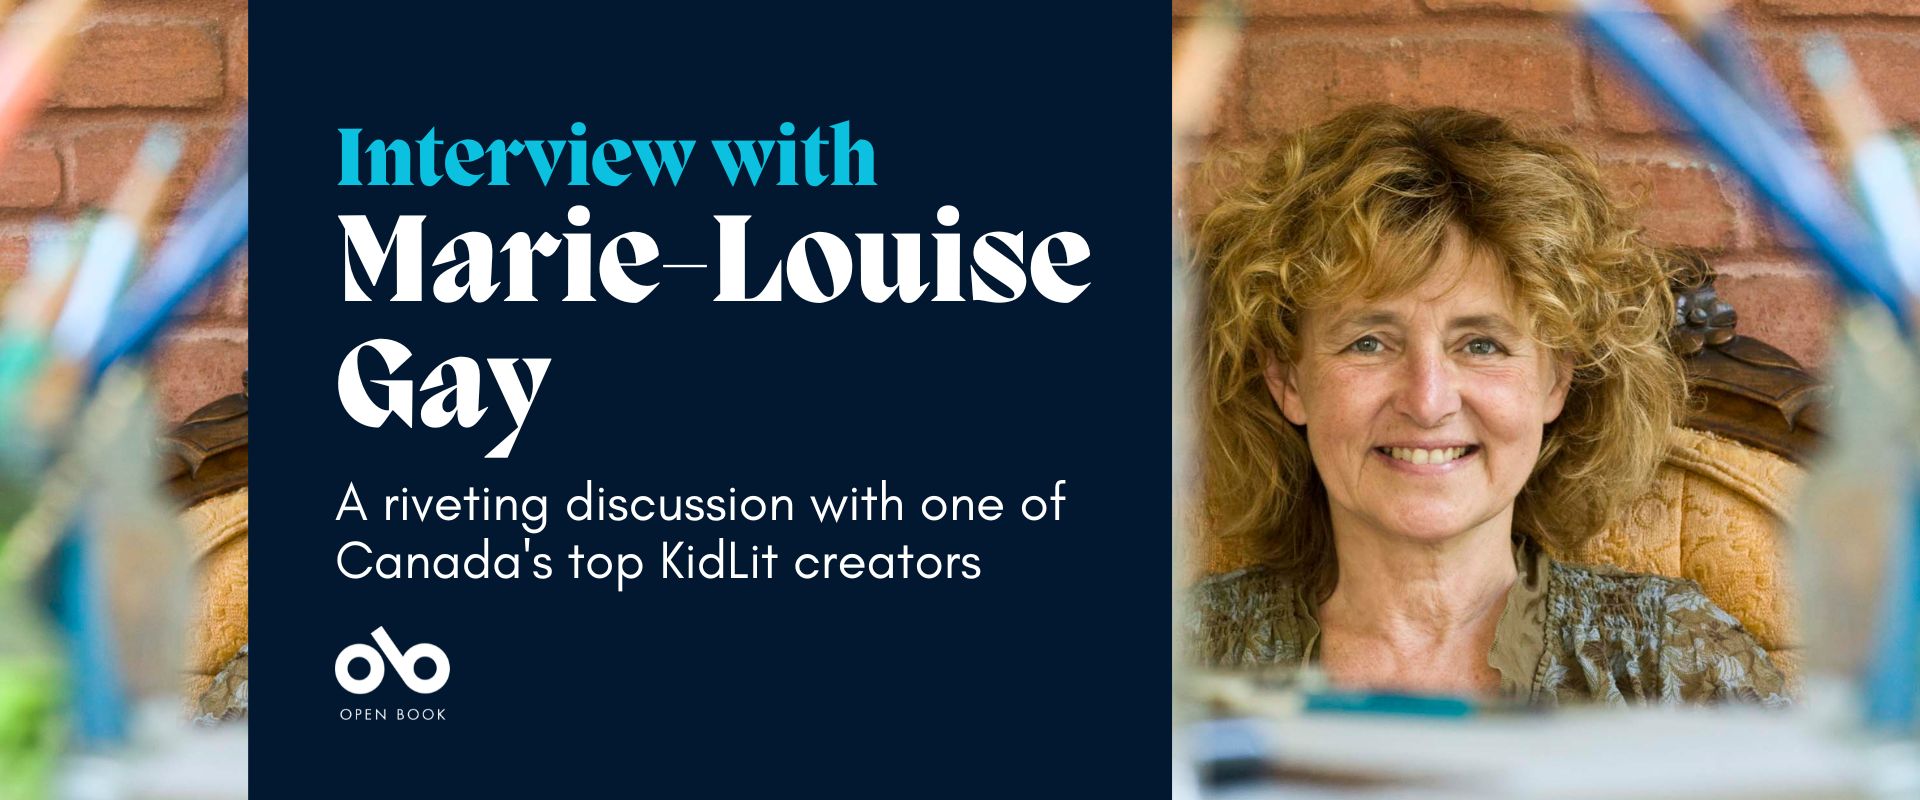 Banner image with photo of writer and illustrator Marie-Louise Gay on the right. Dark blue square on the left reads "Interview with Marie-Louise Gay, A riveting discussion with one of Canada's top KidLit creators". Open Book logo bottom left. Left and right sides of the banner show Gay's art supplies in the foreground.